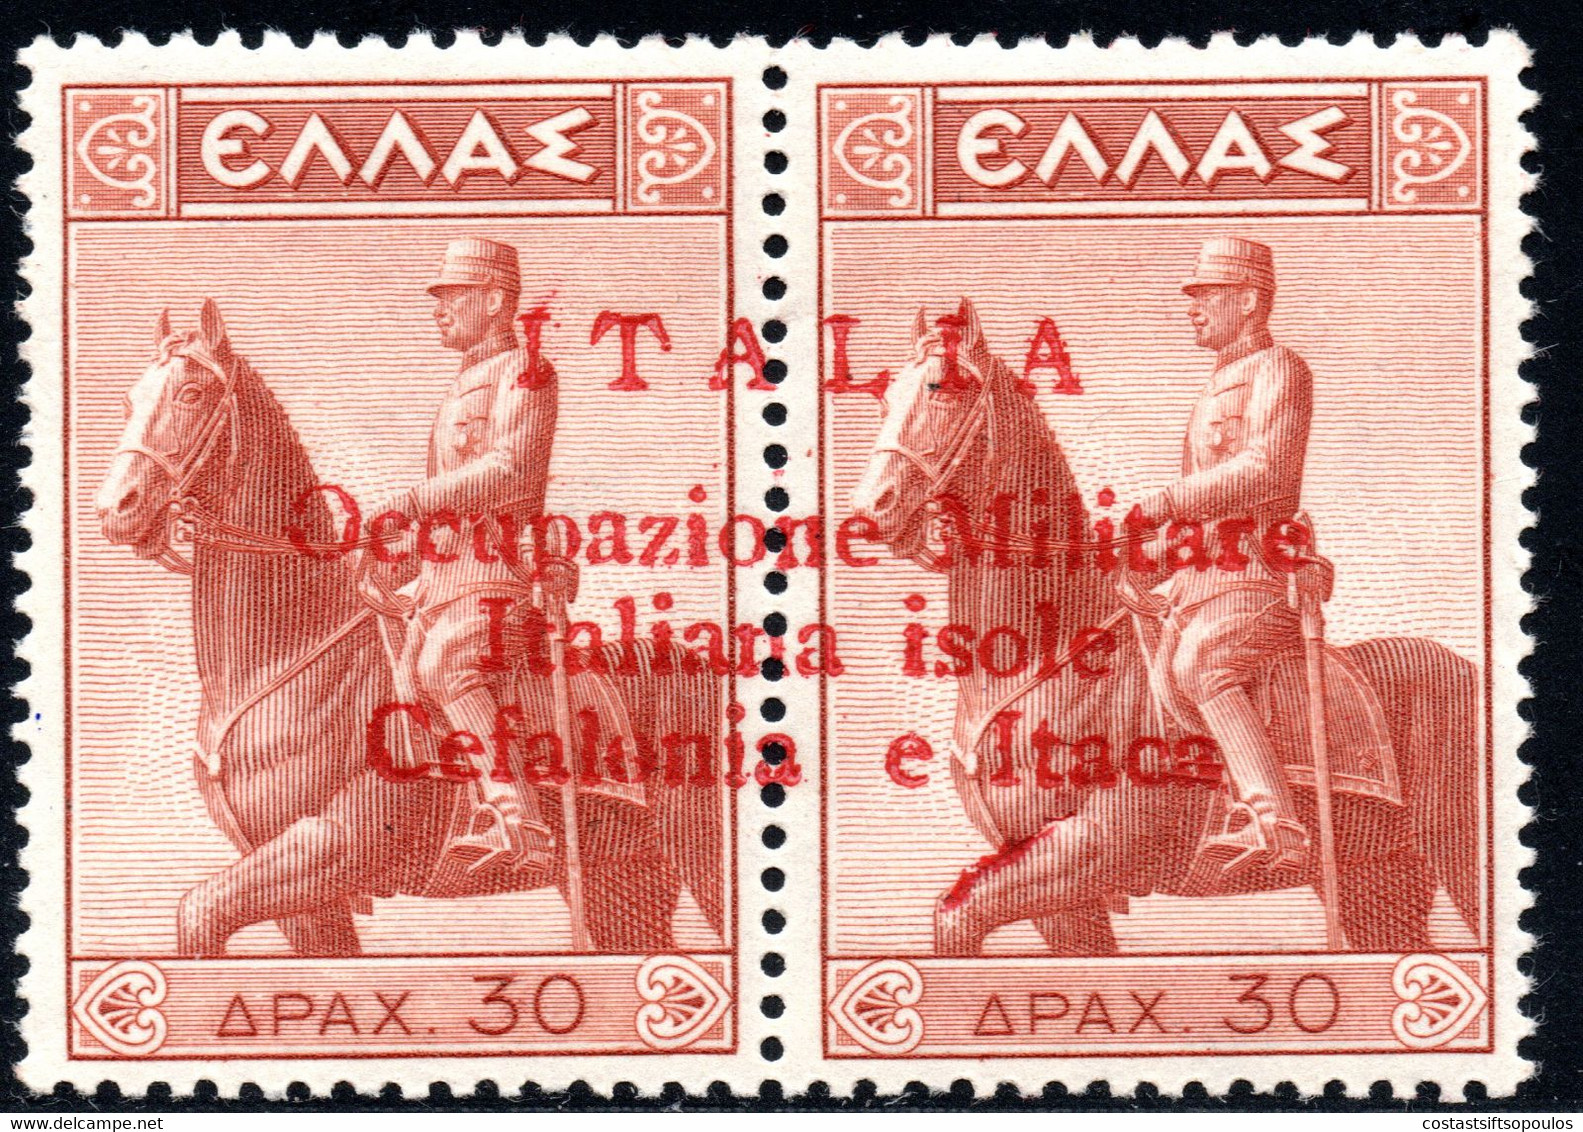 165.GREECE,ITALY,IONIAN,CEFALONIA,1941 30DR.RIDER,RED OVERPRINT???,MNH,POSSIBLY PRIVATE - Islas Ionian